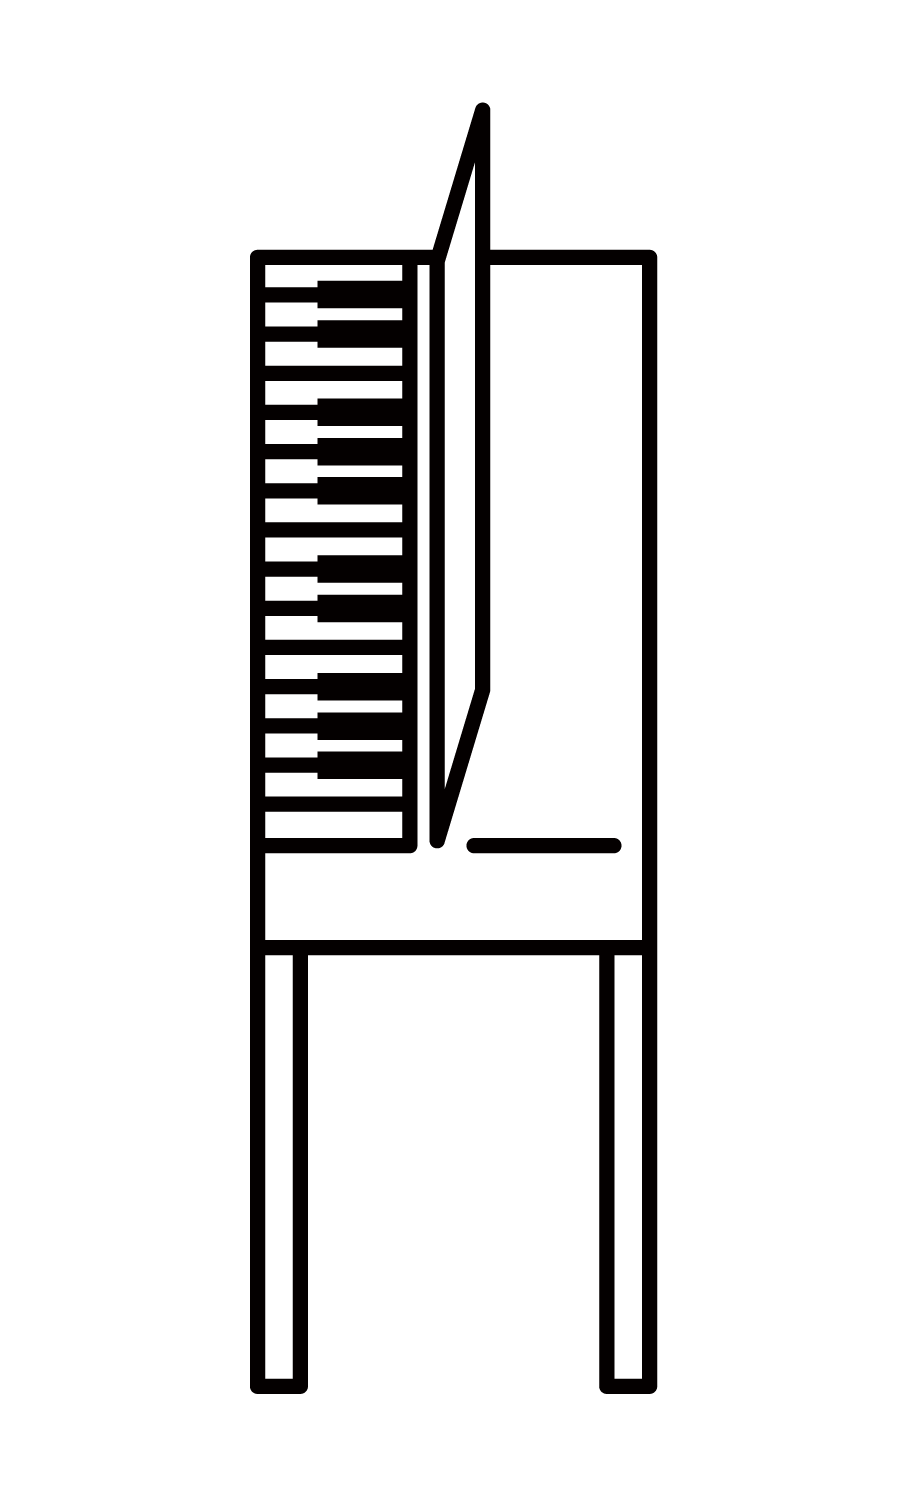 Illustration of an electronic piano